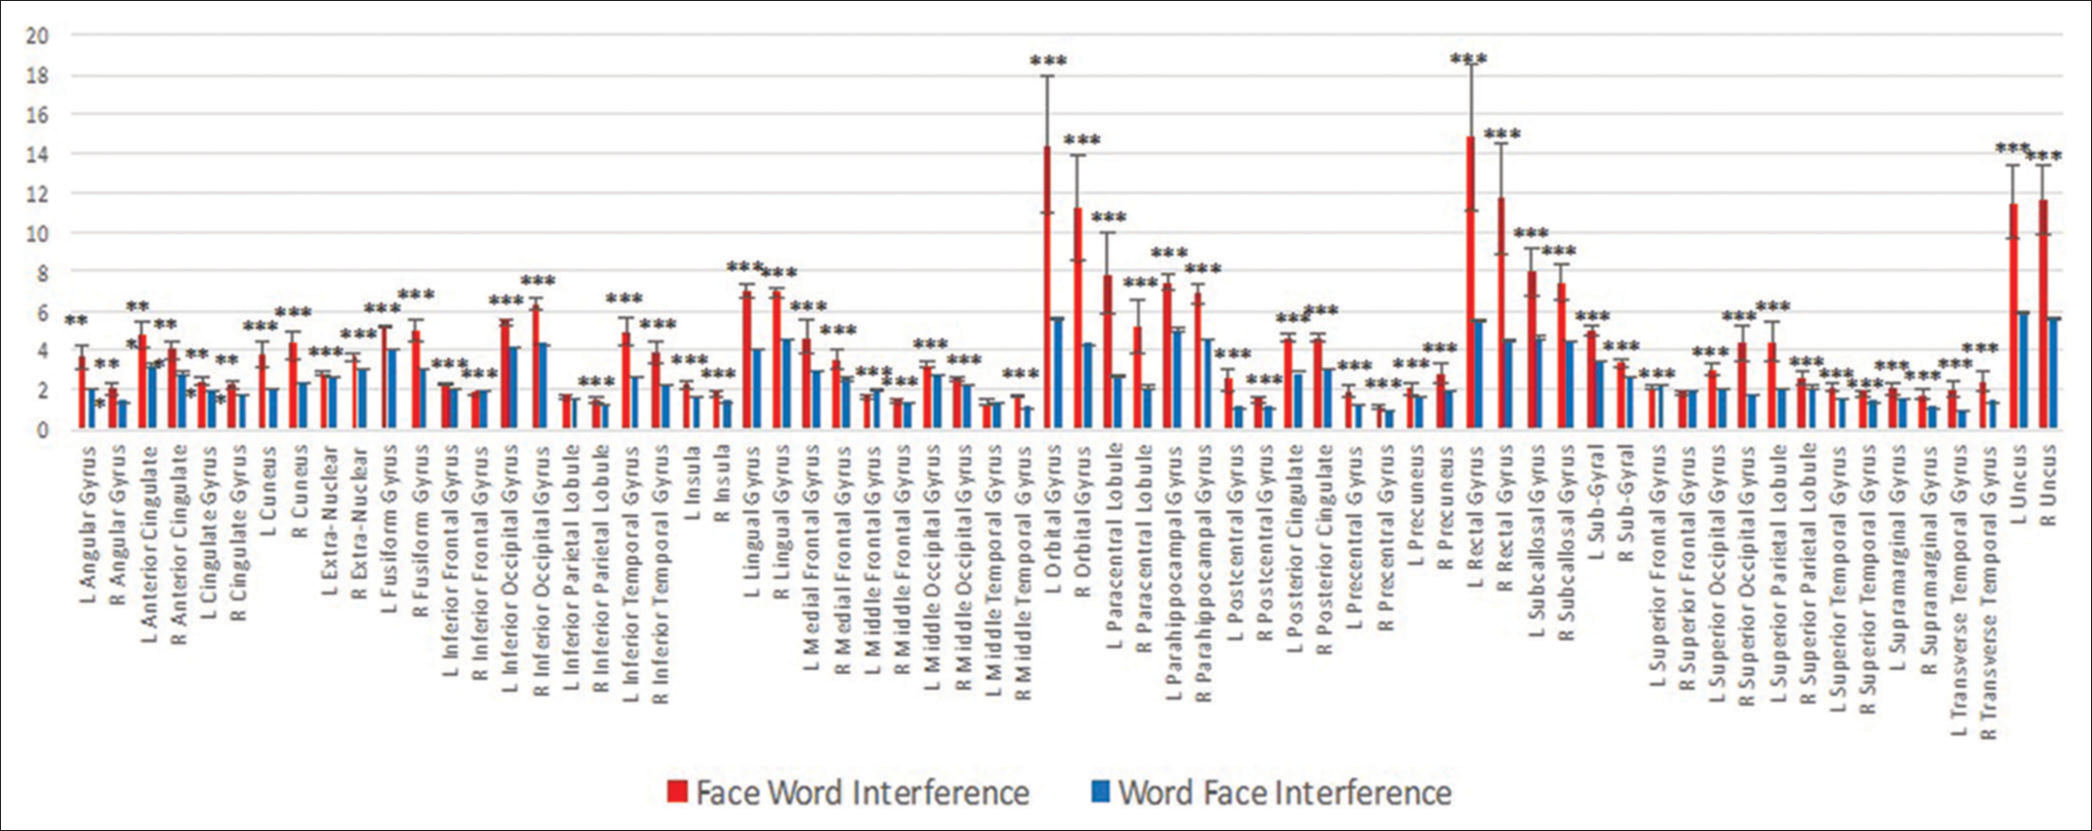 Gyri showing significantly different activity have been compared between Face word and Word face interference. The significant areas (***P < 0.001) have been plotted.